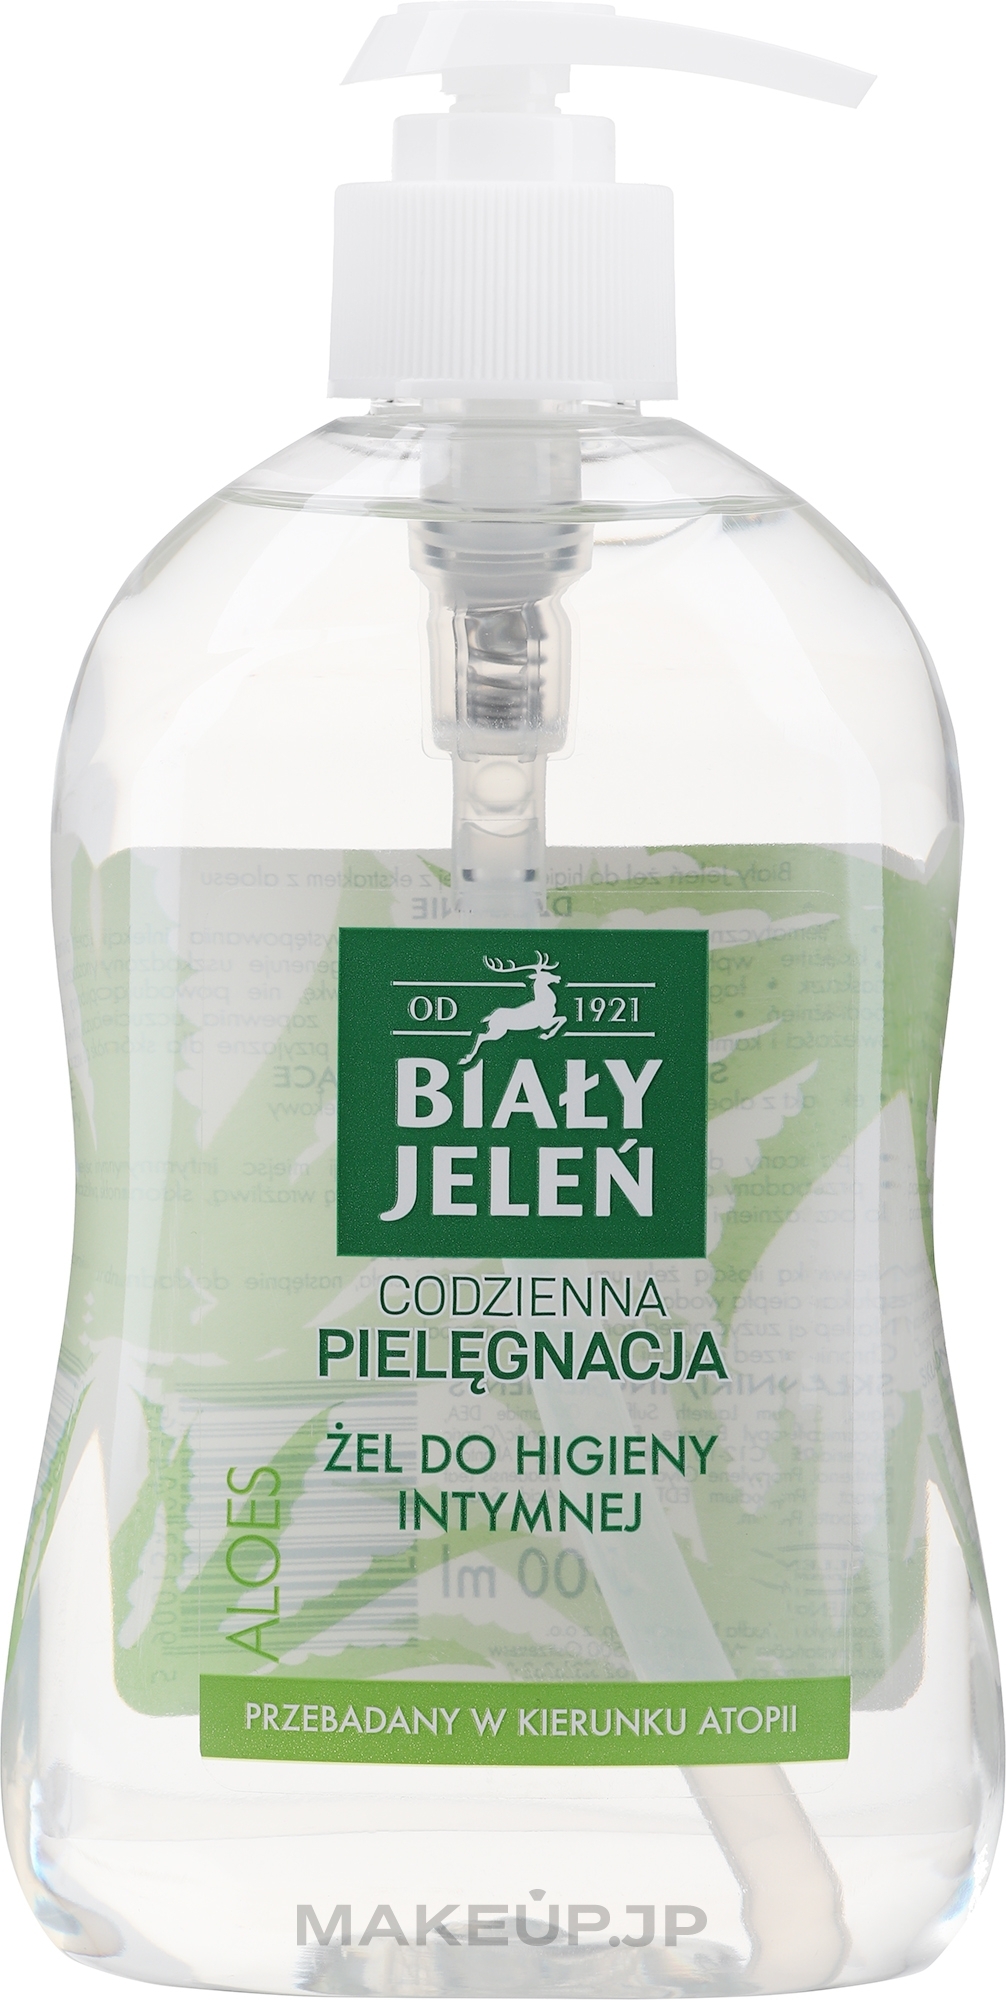 Hypoallergenic Gel for Intimate Hygiene with Aloe - Bialy Jelen Hypoallergenic Gel For Intimate Hygiene — photo 500 ml